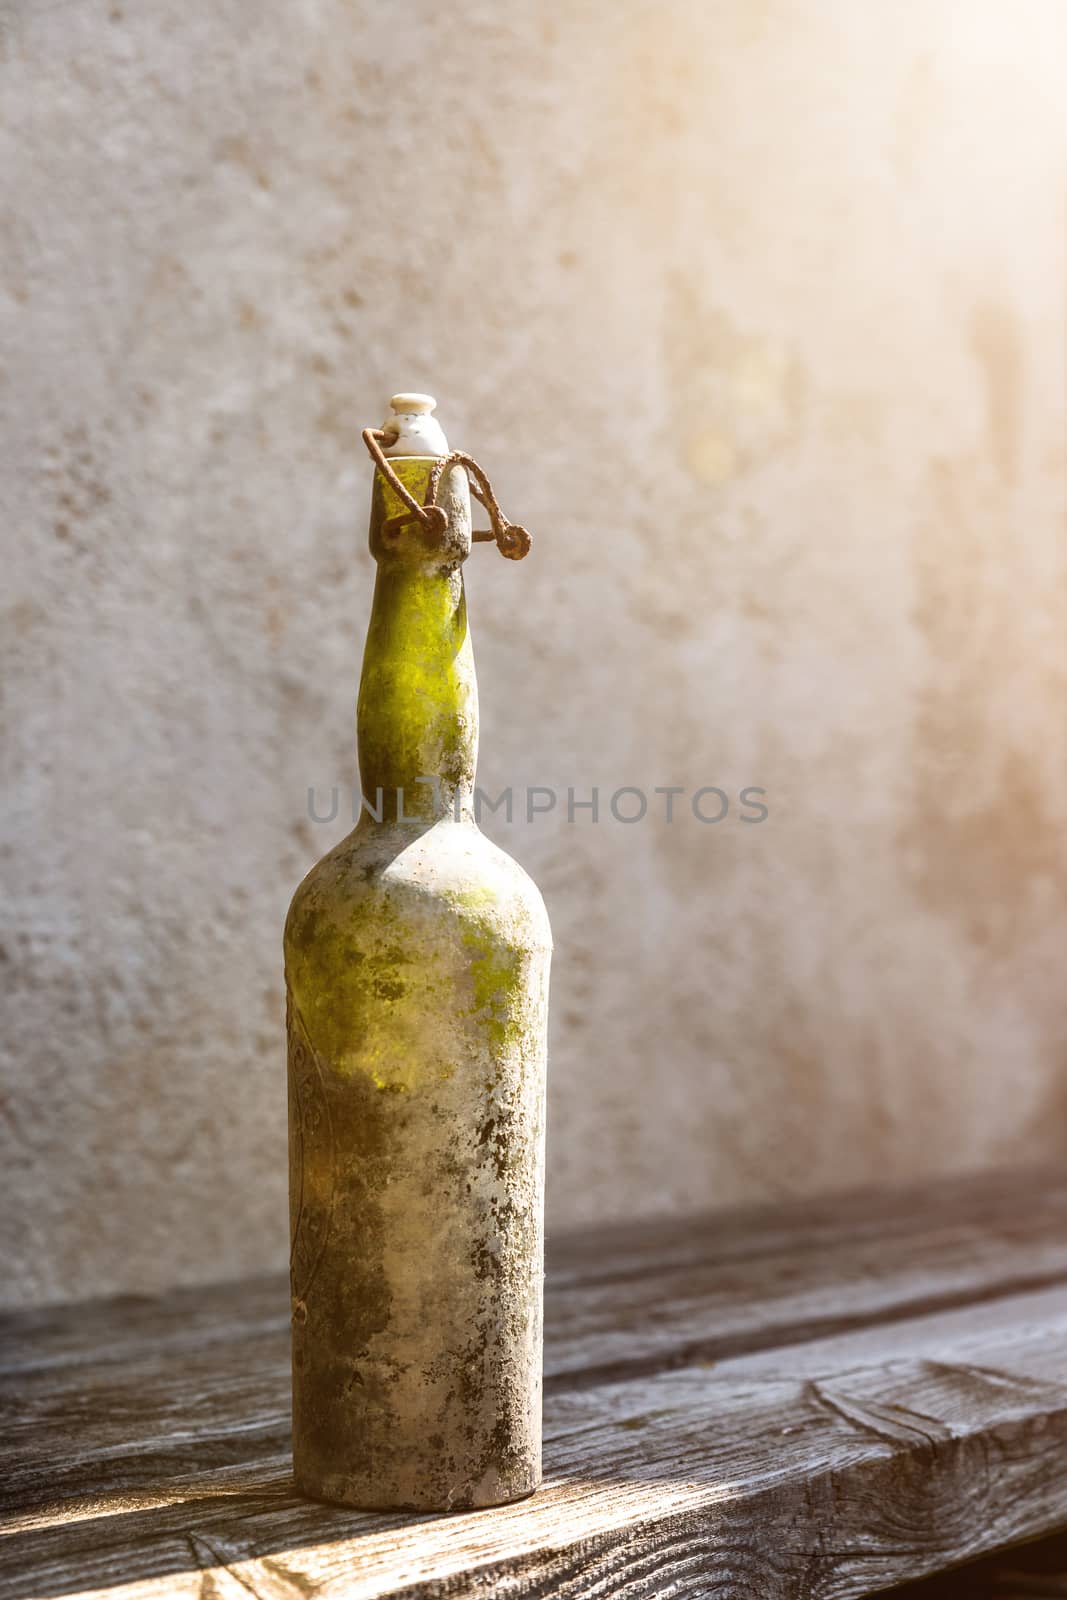 An image of a dirty old wine bottle